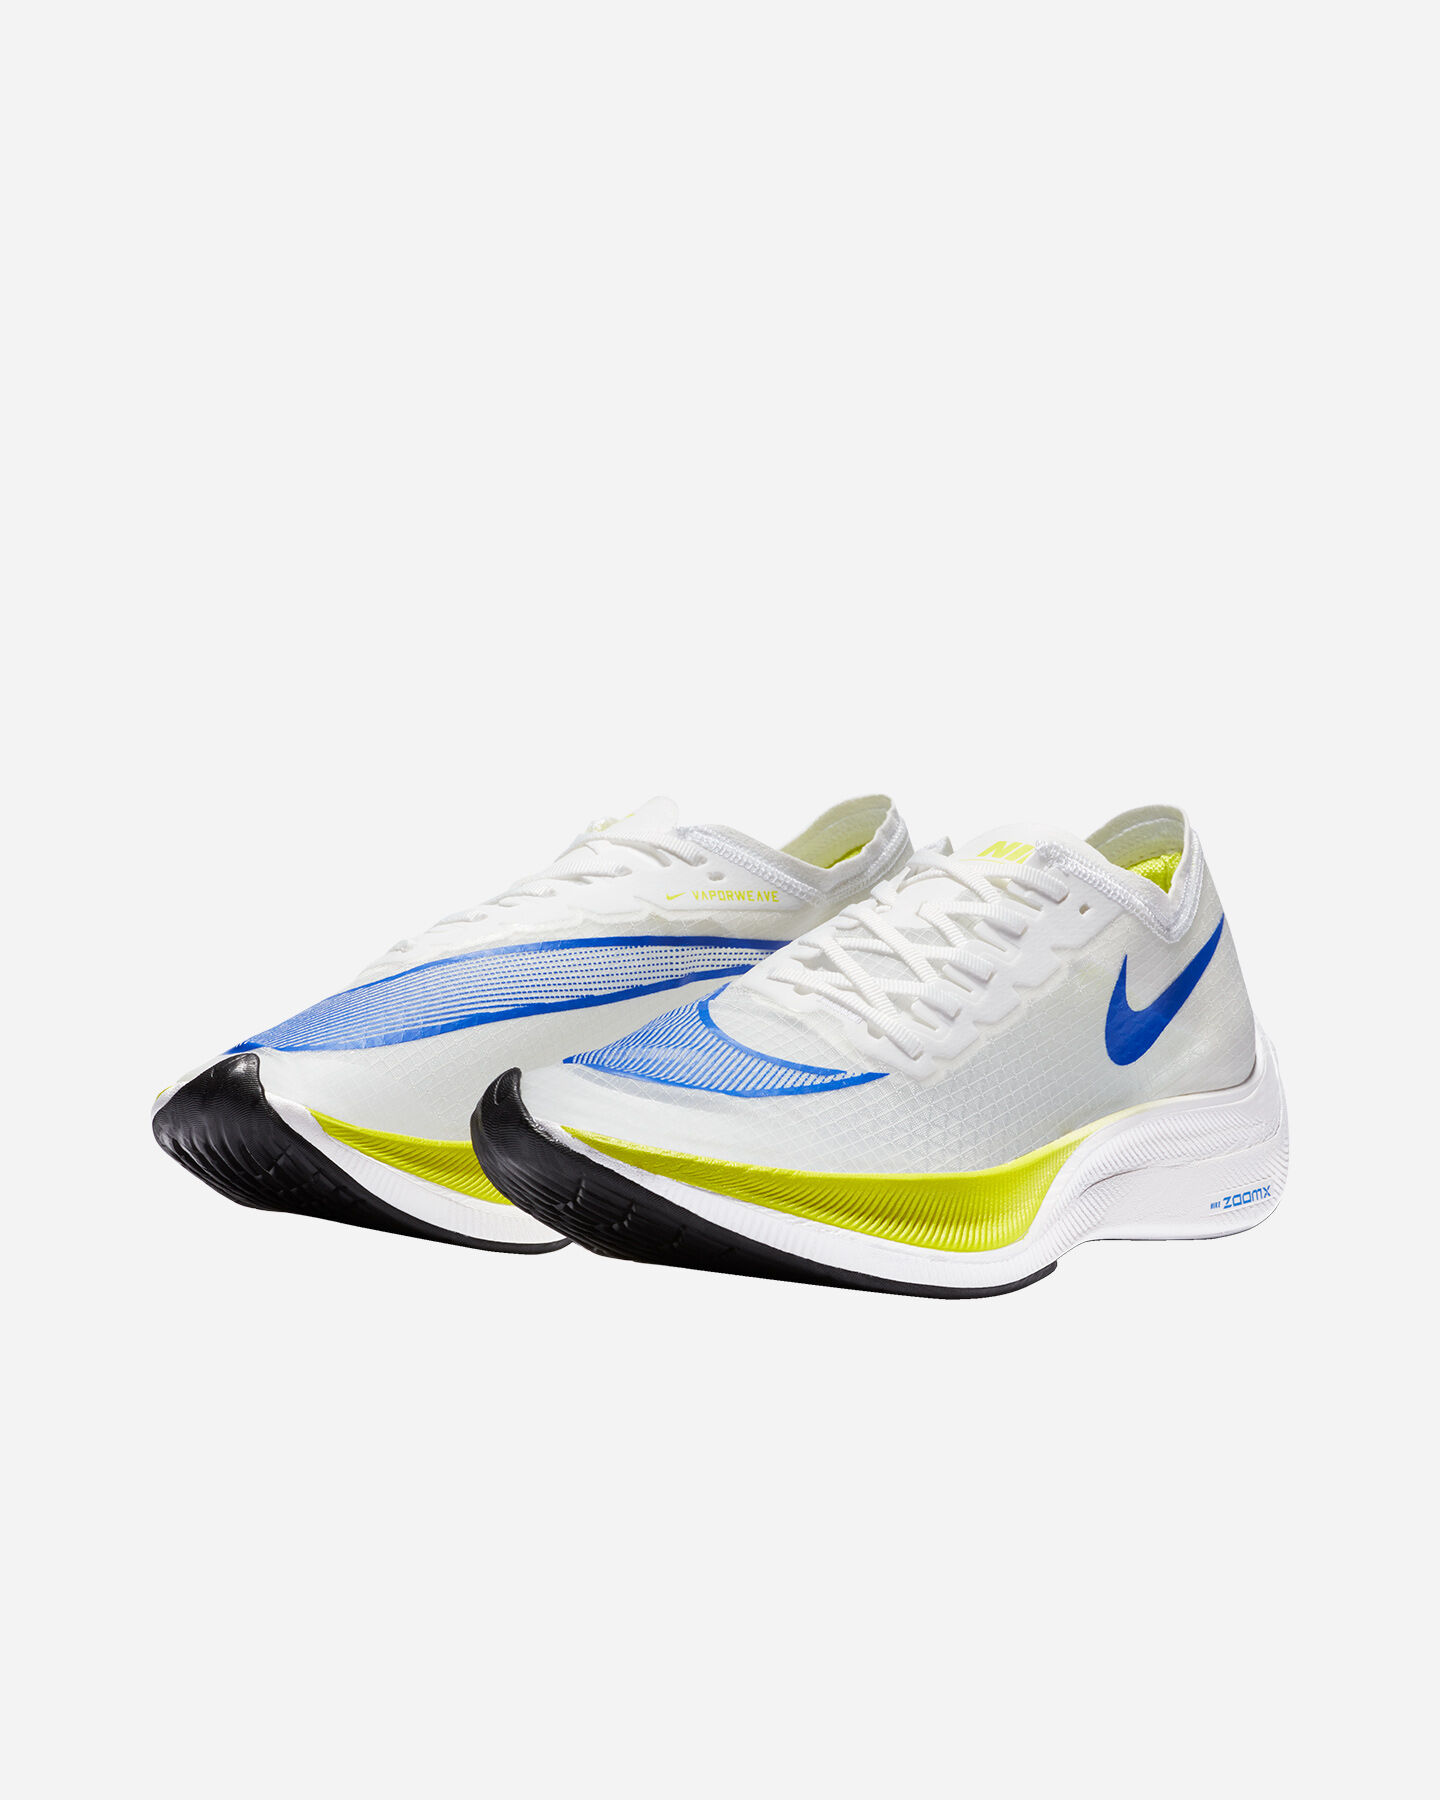  Scarpe running NIKE ZOOMX VAPORFLY NEXT% M S5267954|103|4 scatto 1